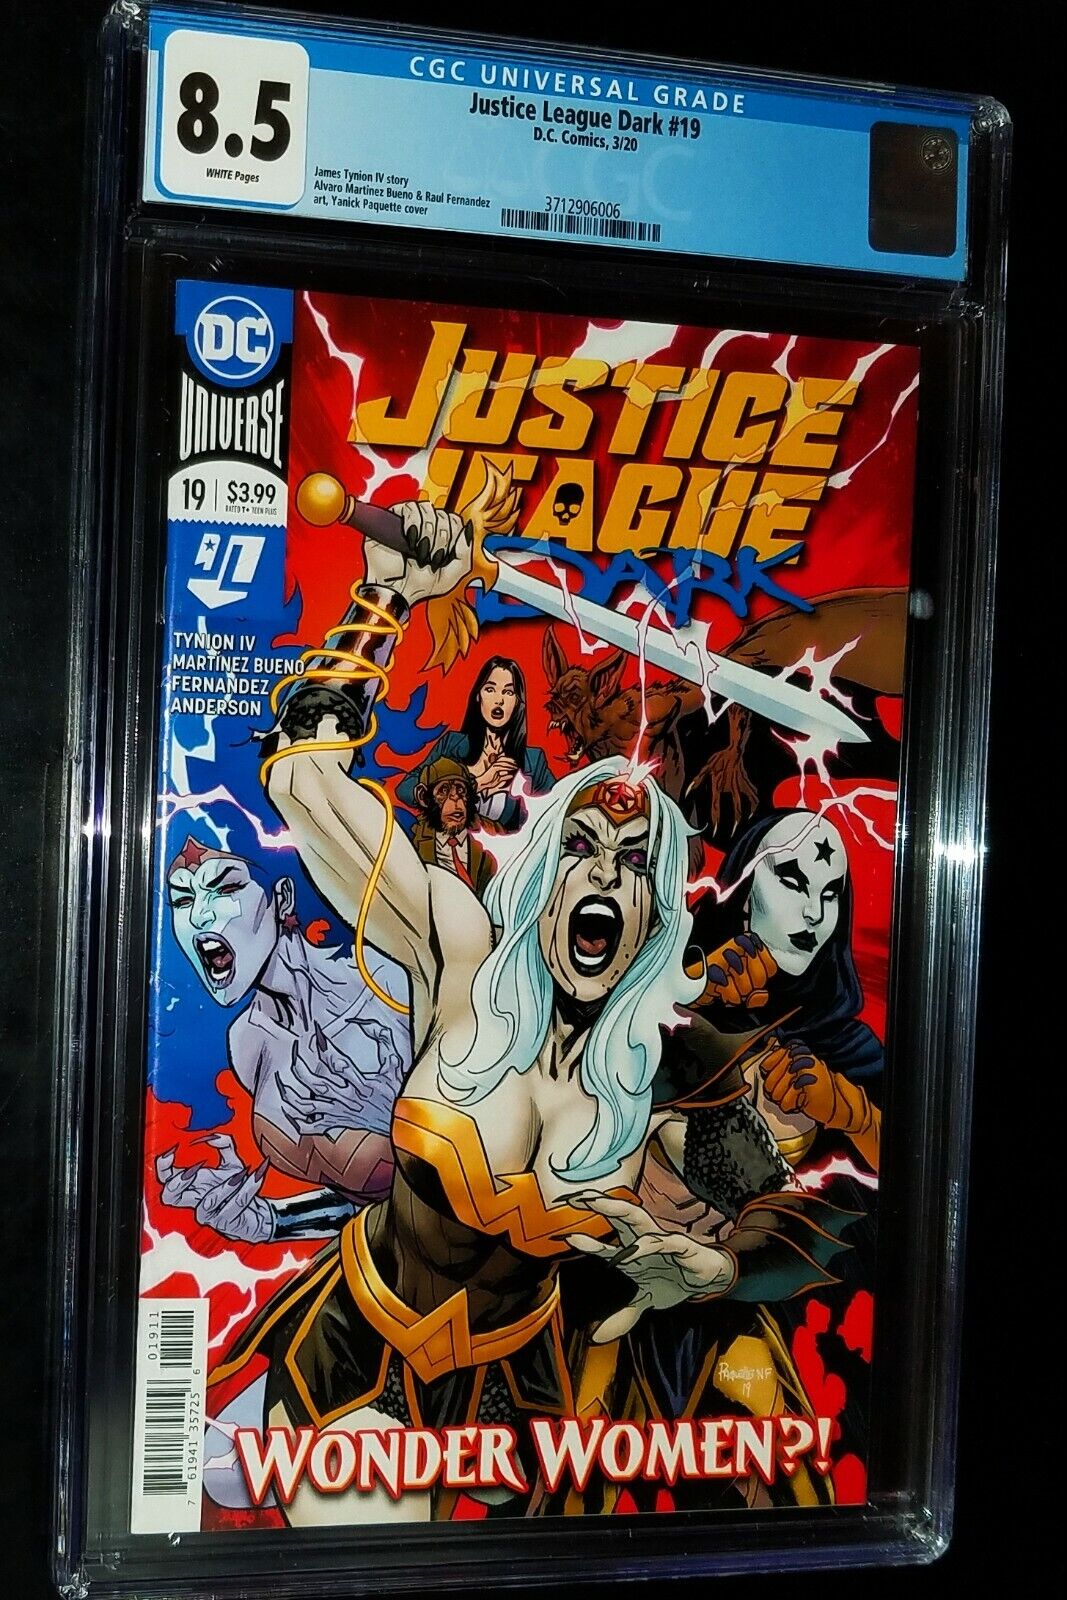 JUSTICE LEAGUE DARK CGC #19 2020 DC Comics CGC 8.5 Very Fine + White Pages 0626